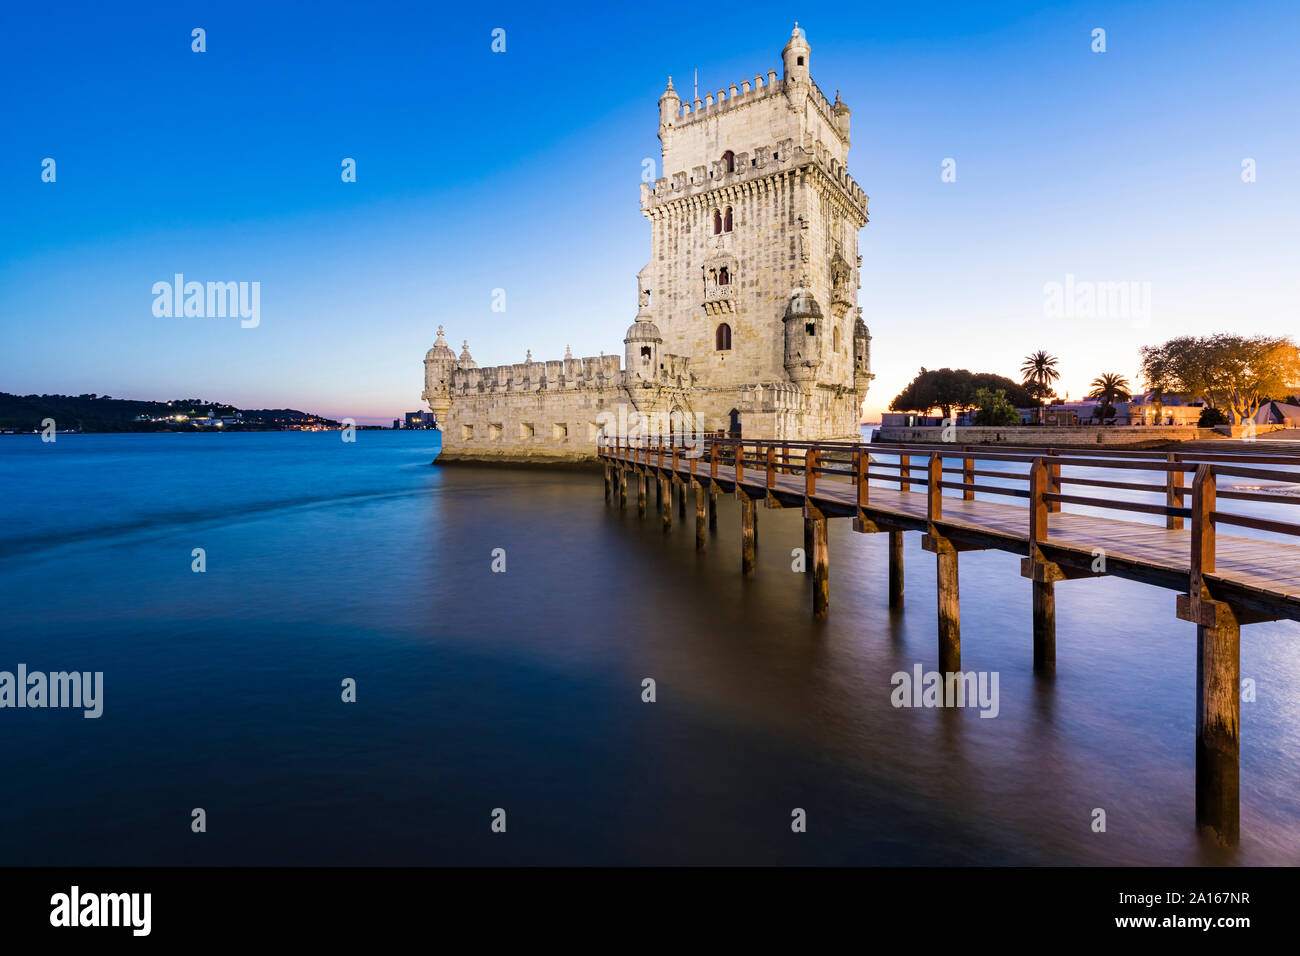 Portugal, Lisbon, Belem Tower on Tagus river at sunset Stock Photo